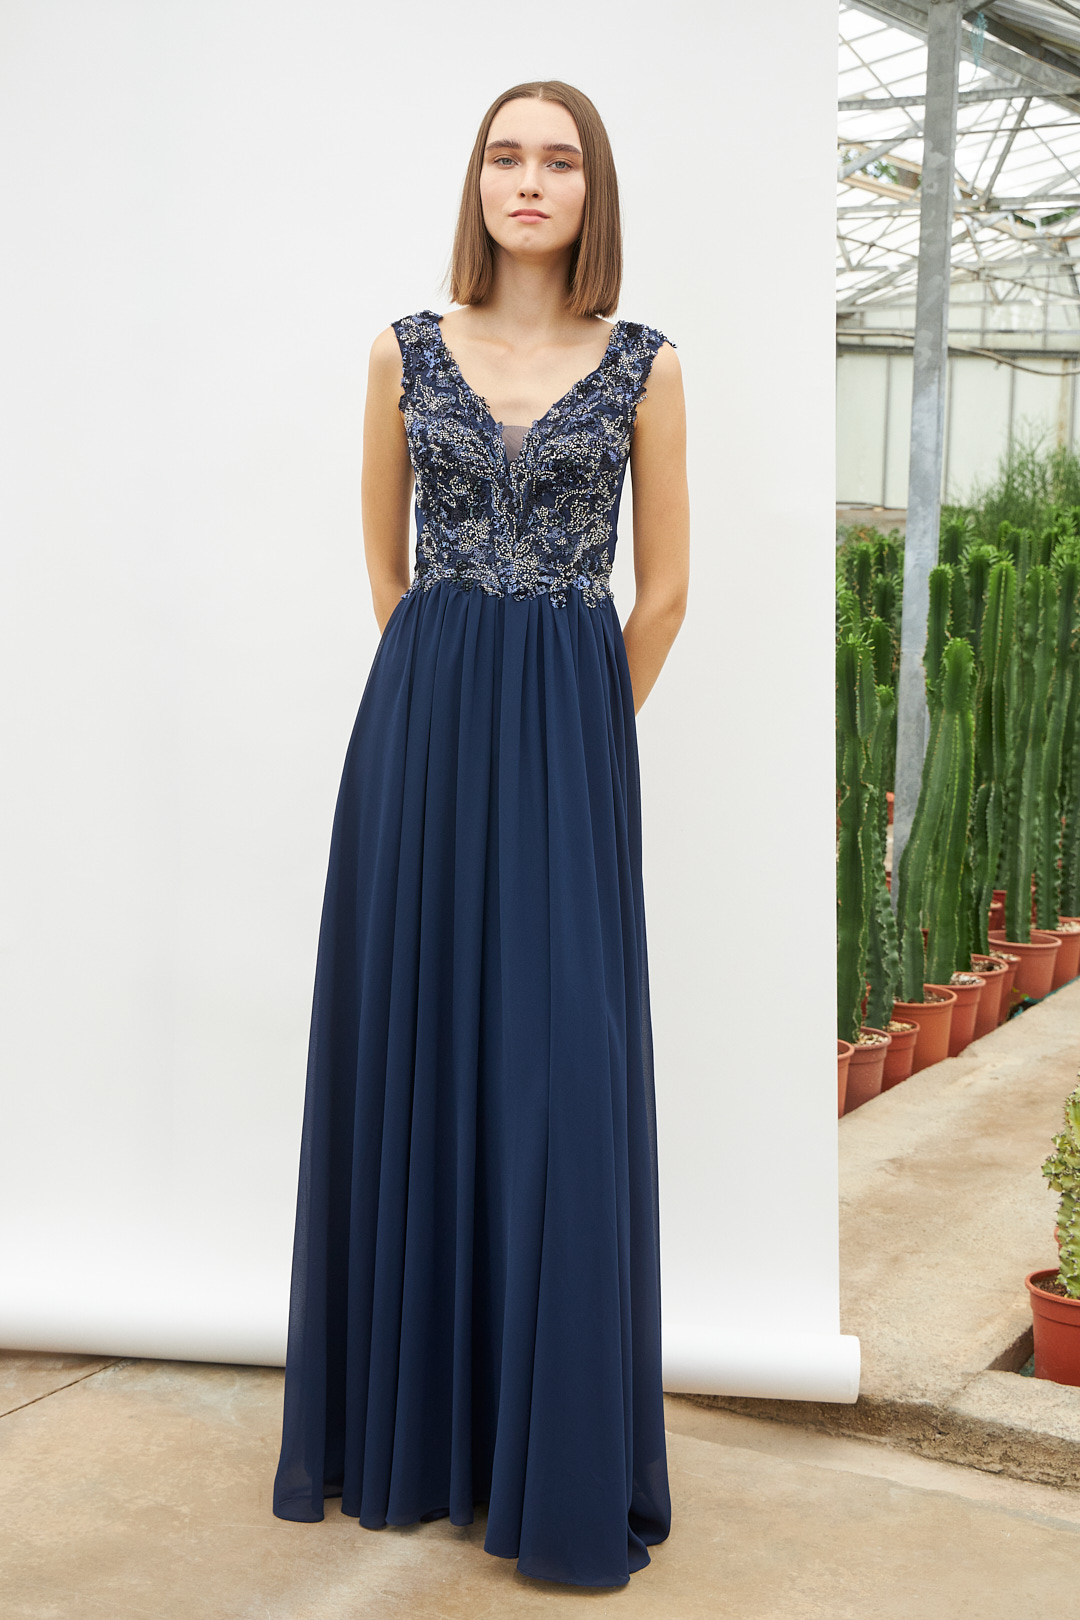 Classic Dresses / Long classic dresss with fuly beaded top and wide straps